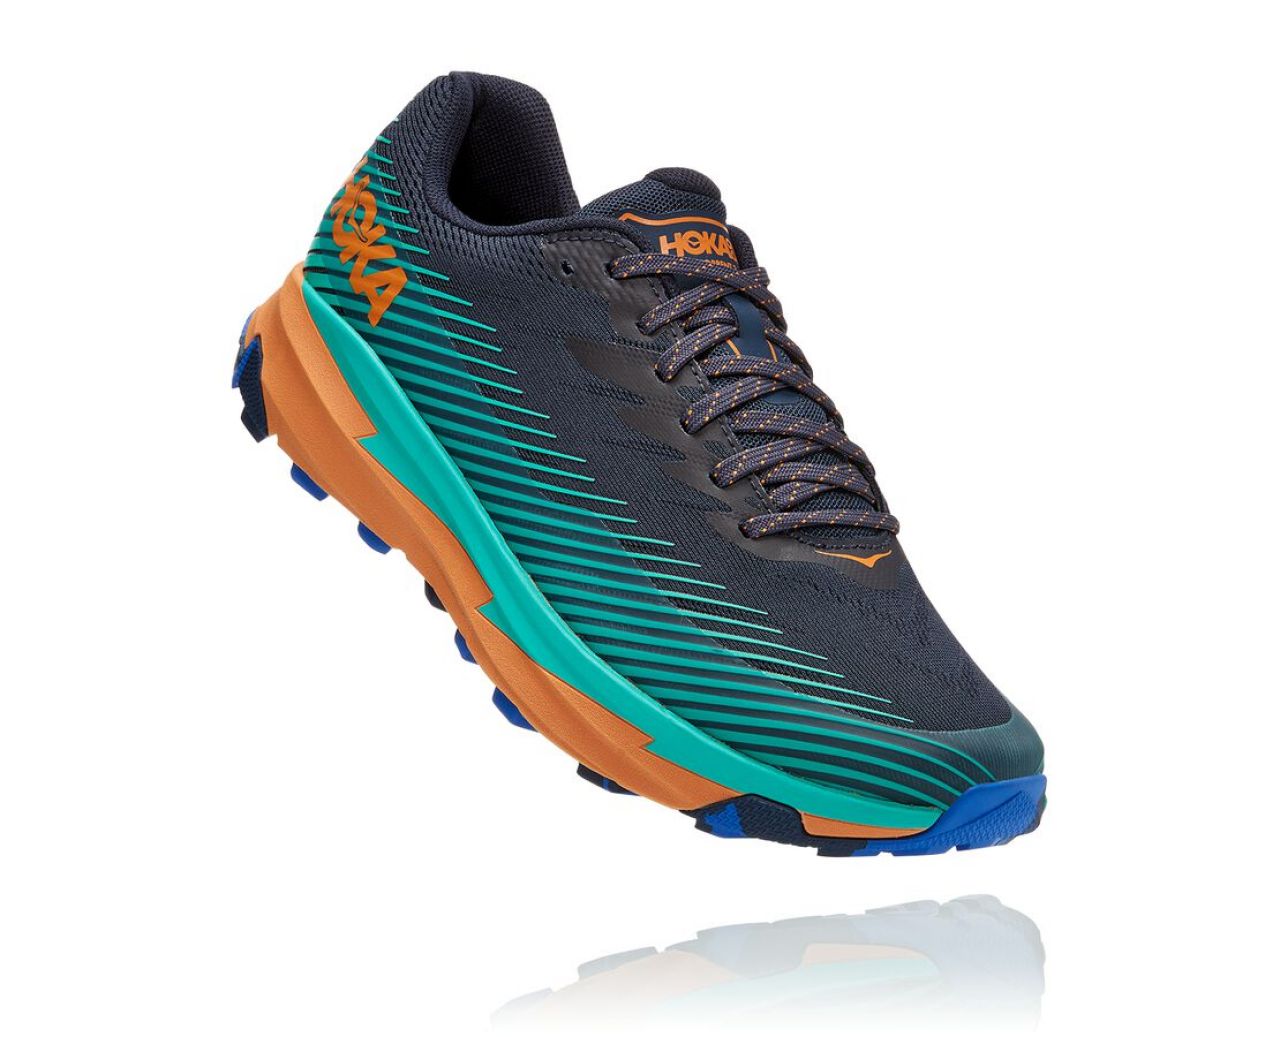 HOKA ONE ONE TORRENT 2 OUTER SPACE ET ATLANTIS Chaussures de Trail